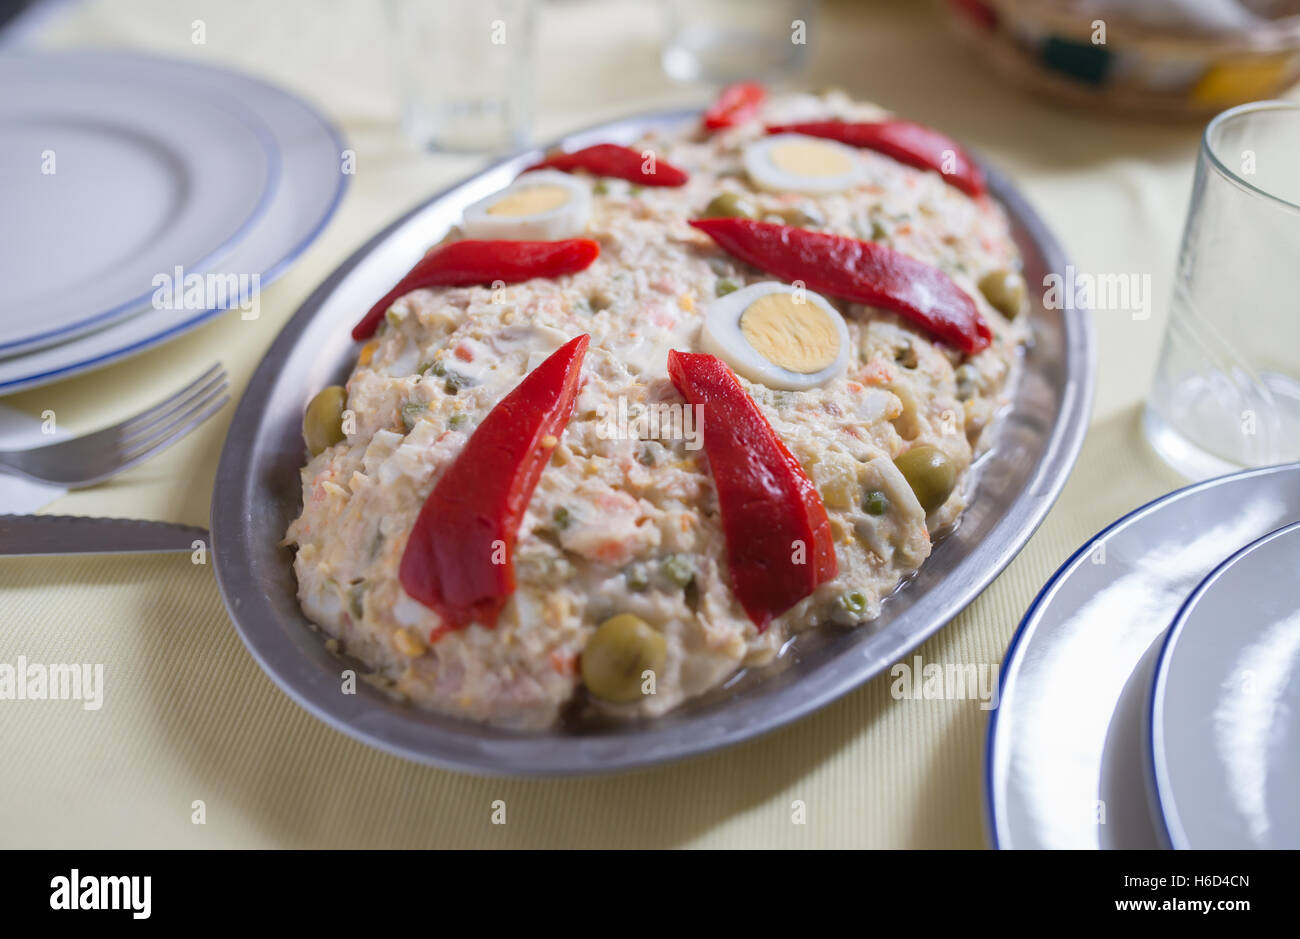 Russian salad on a table, a delicious meal. Stock Photo